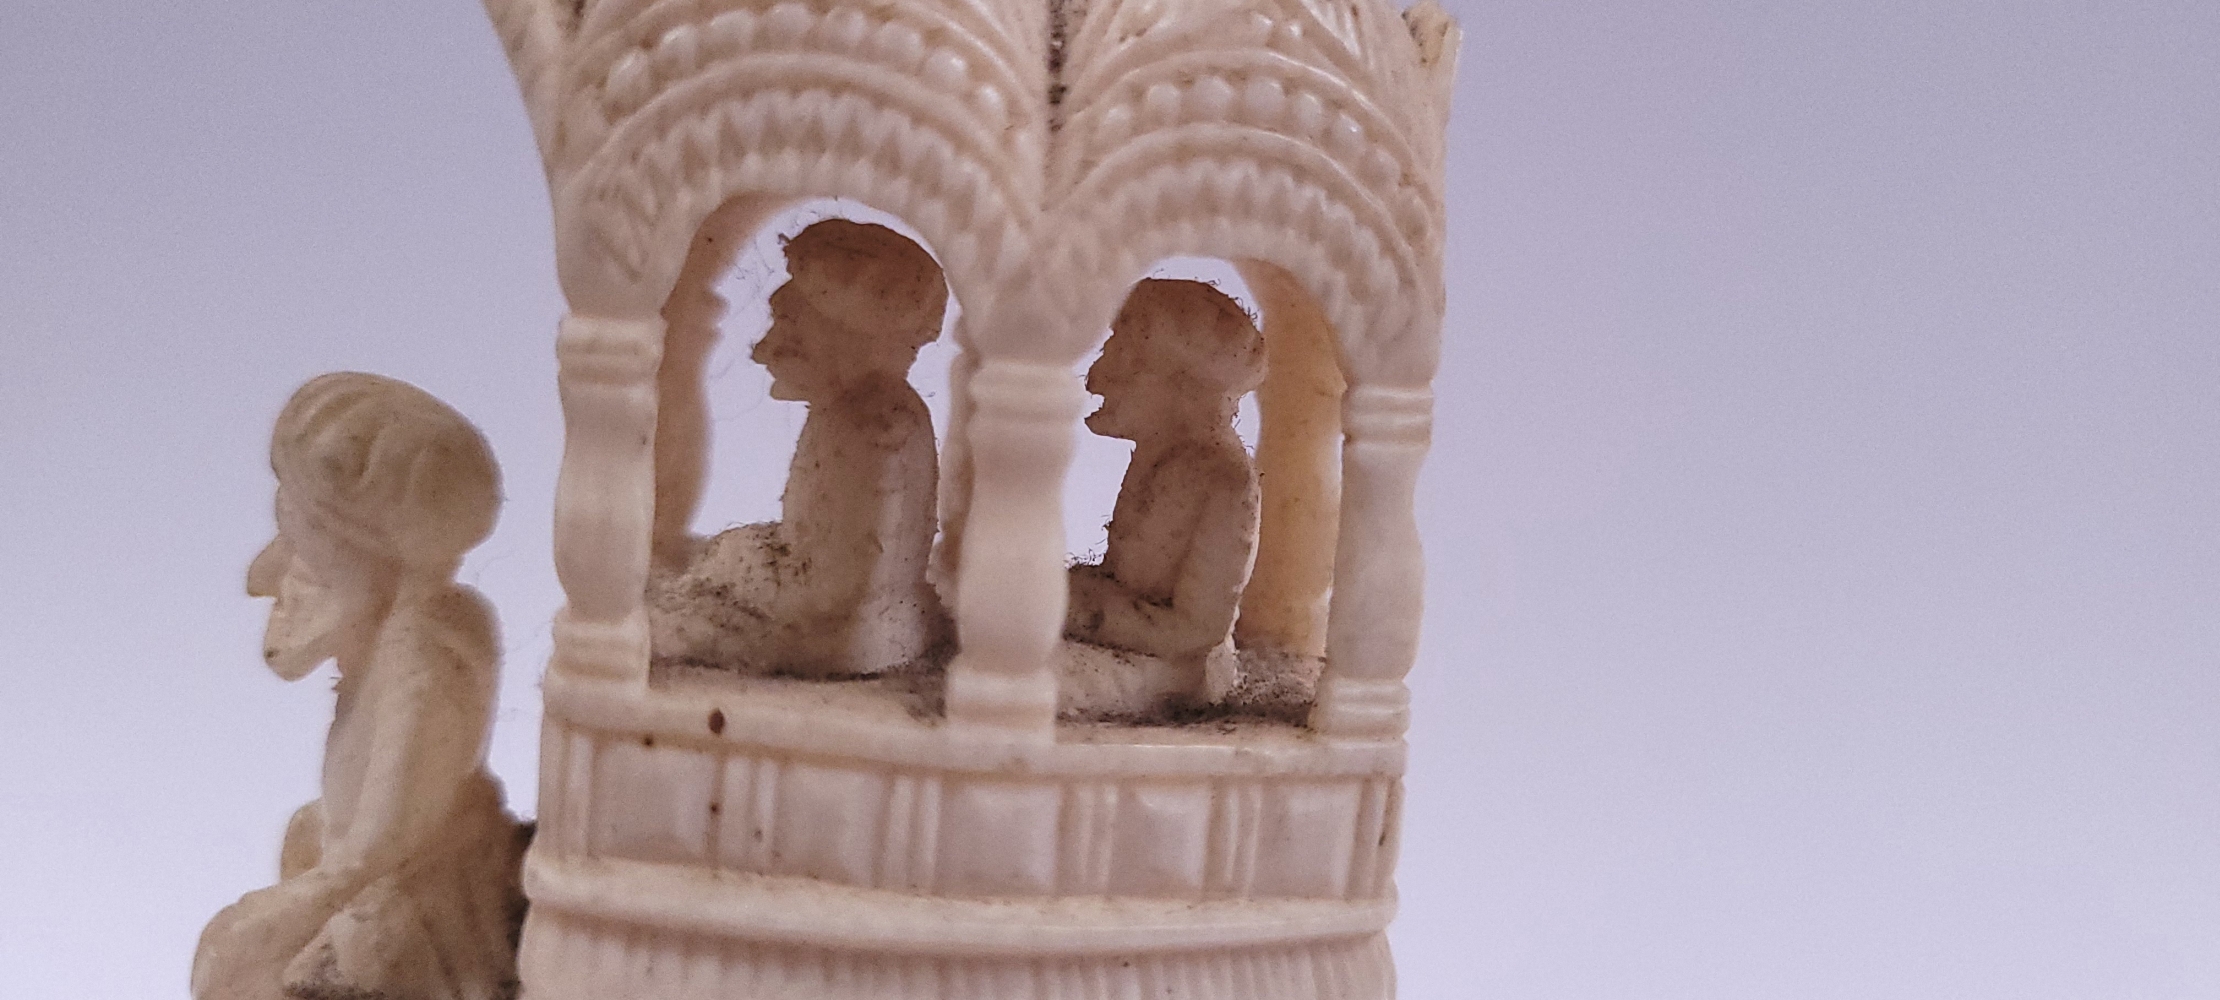 A FINELY CARVED IVORY FIGURE OF AN ELEPHANT CARRYING A HOWDAH, with a driver and two passengers with - Image 4 of 7